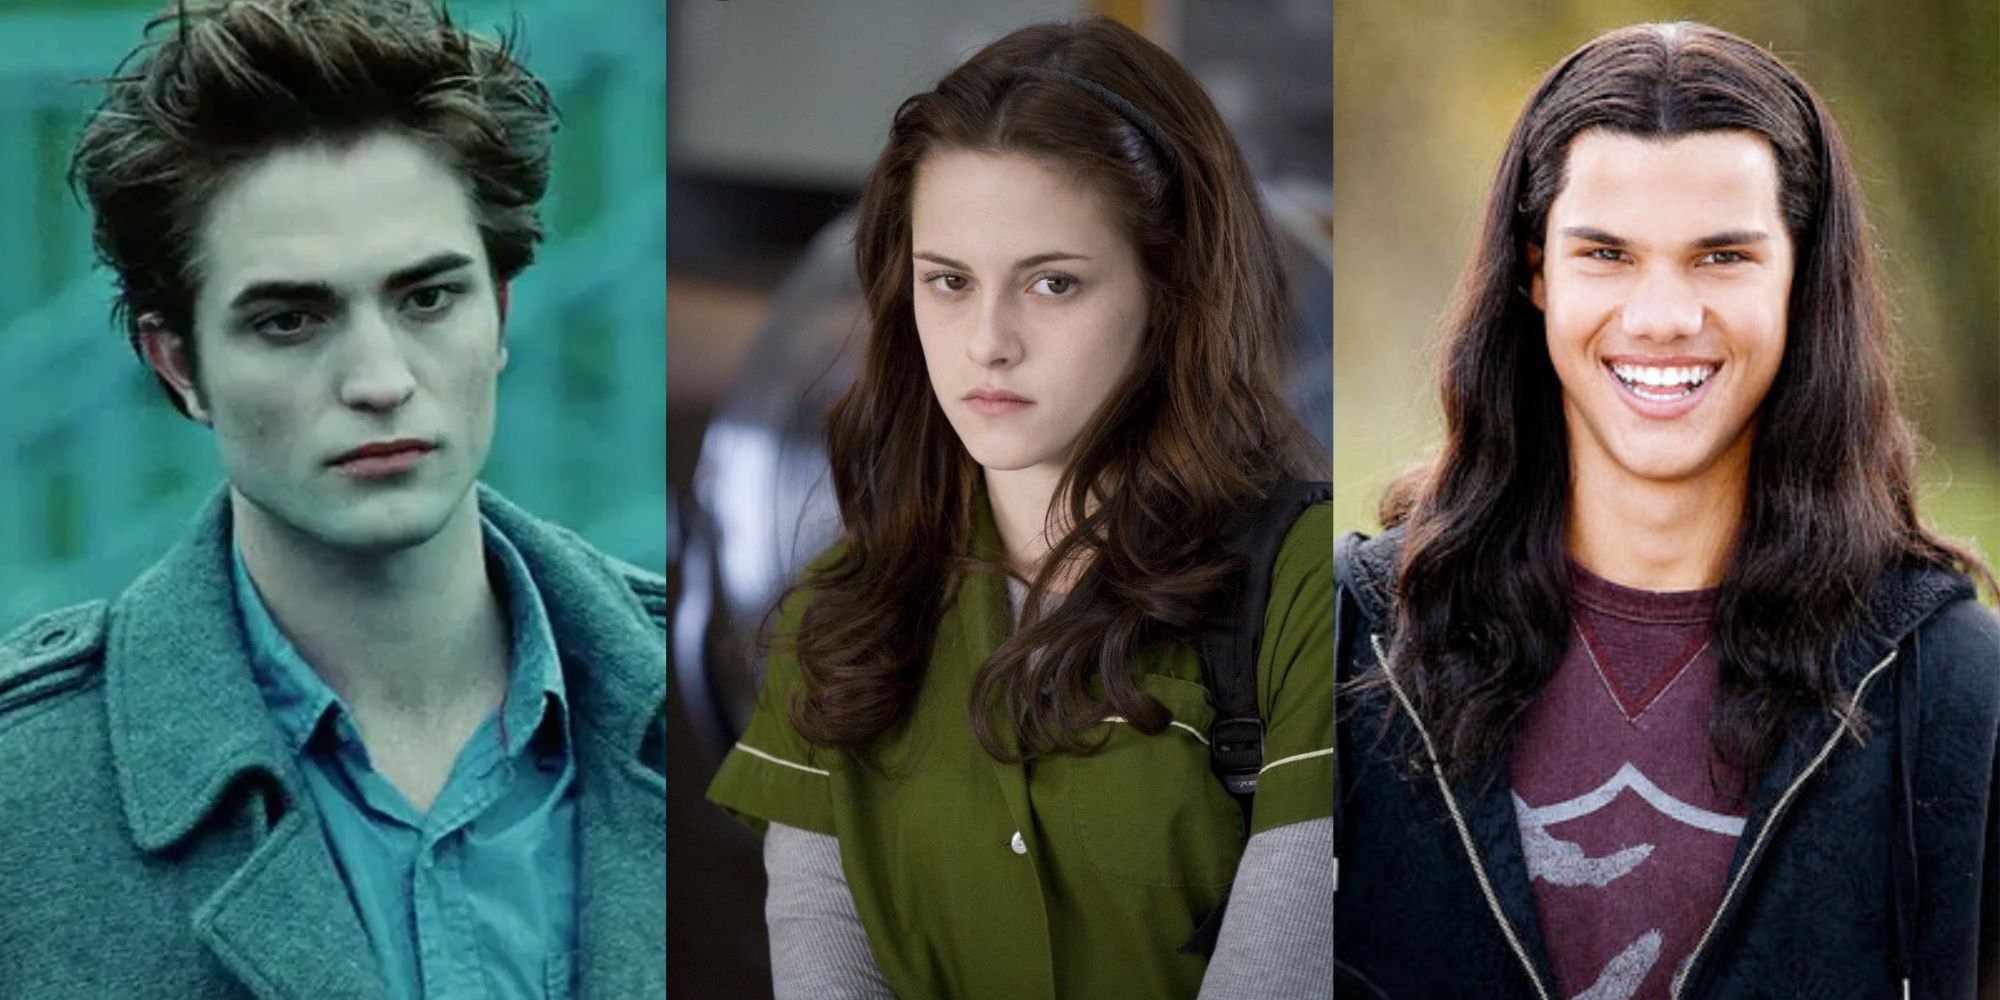 Edward looks serious, Bella in green shirt looks shy, and Jacob with long hair smiles in Twilight.